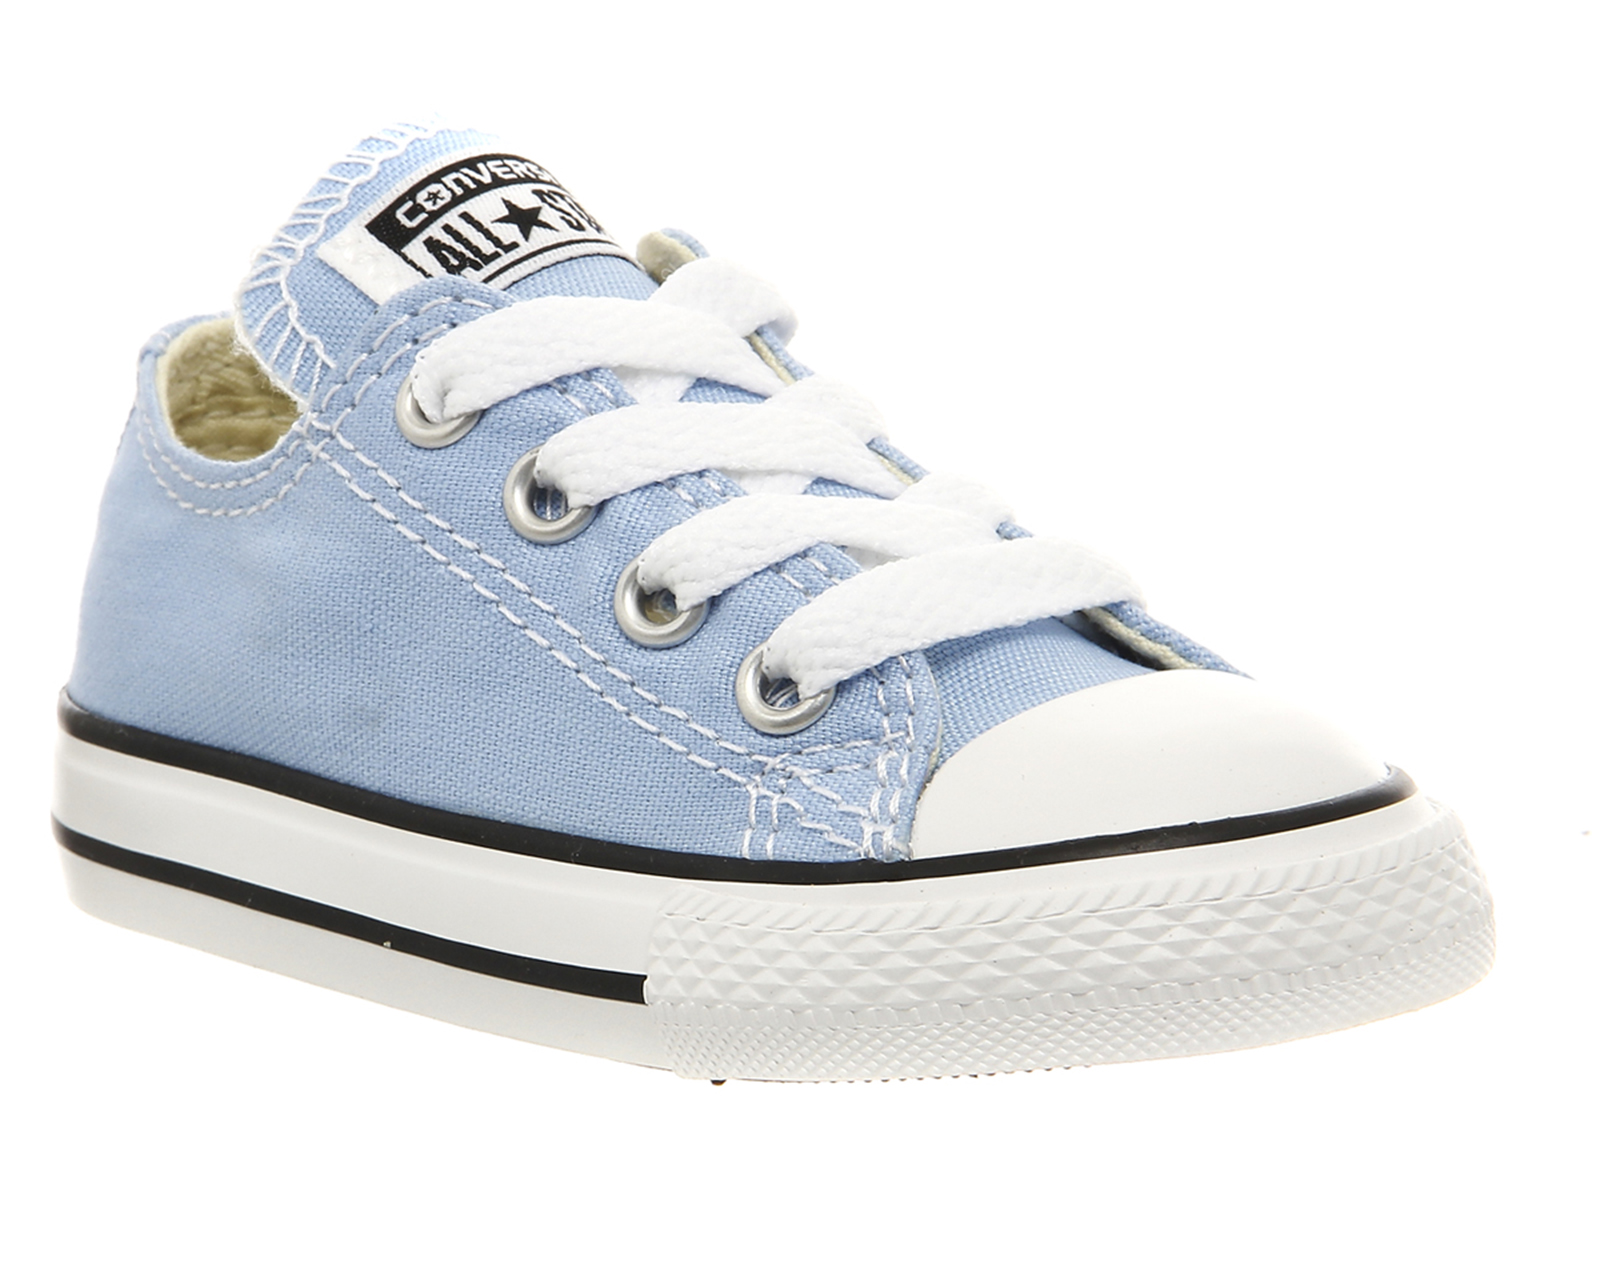 ConverseAll Star Low Infant ShoesBlue Sky